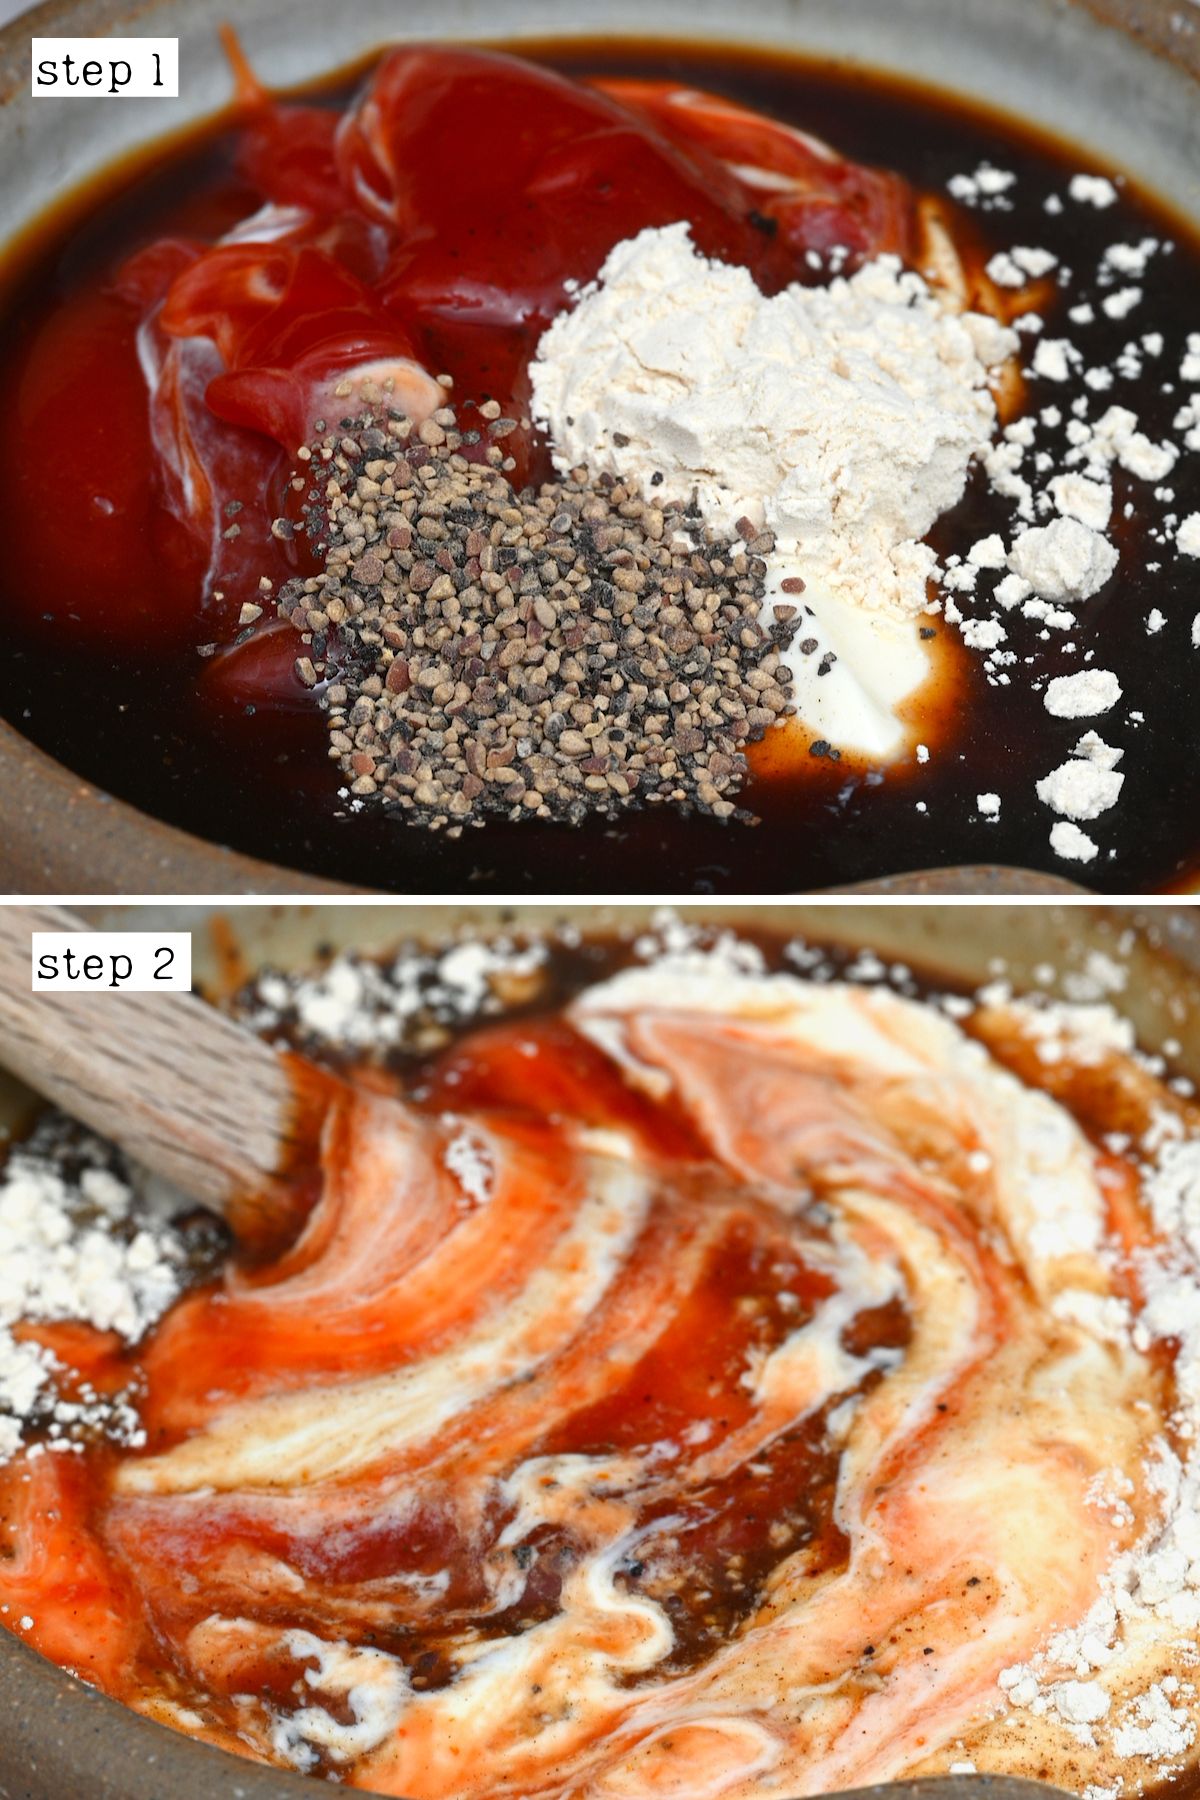 Steps for mixing Raising Cane's sauce